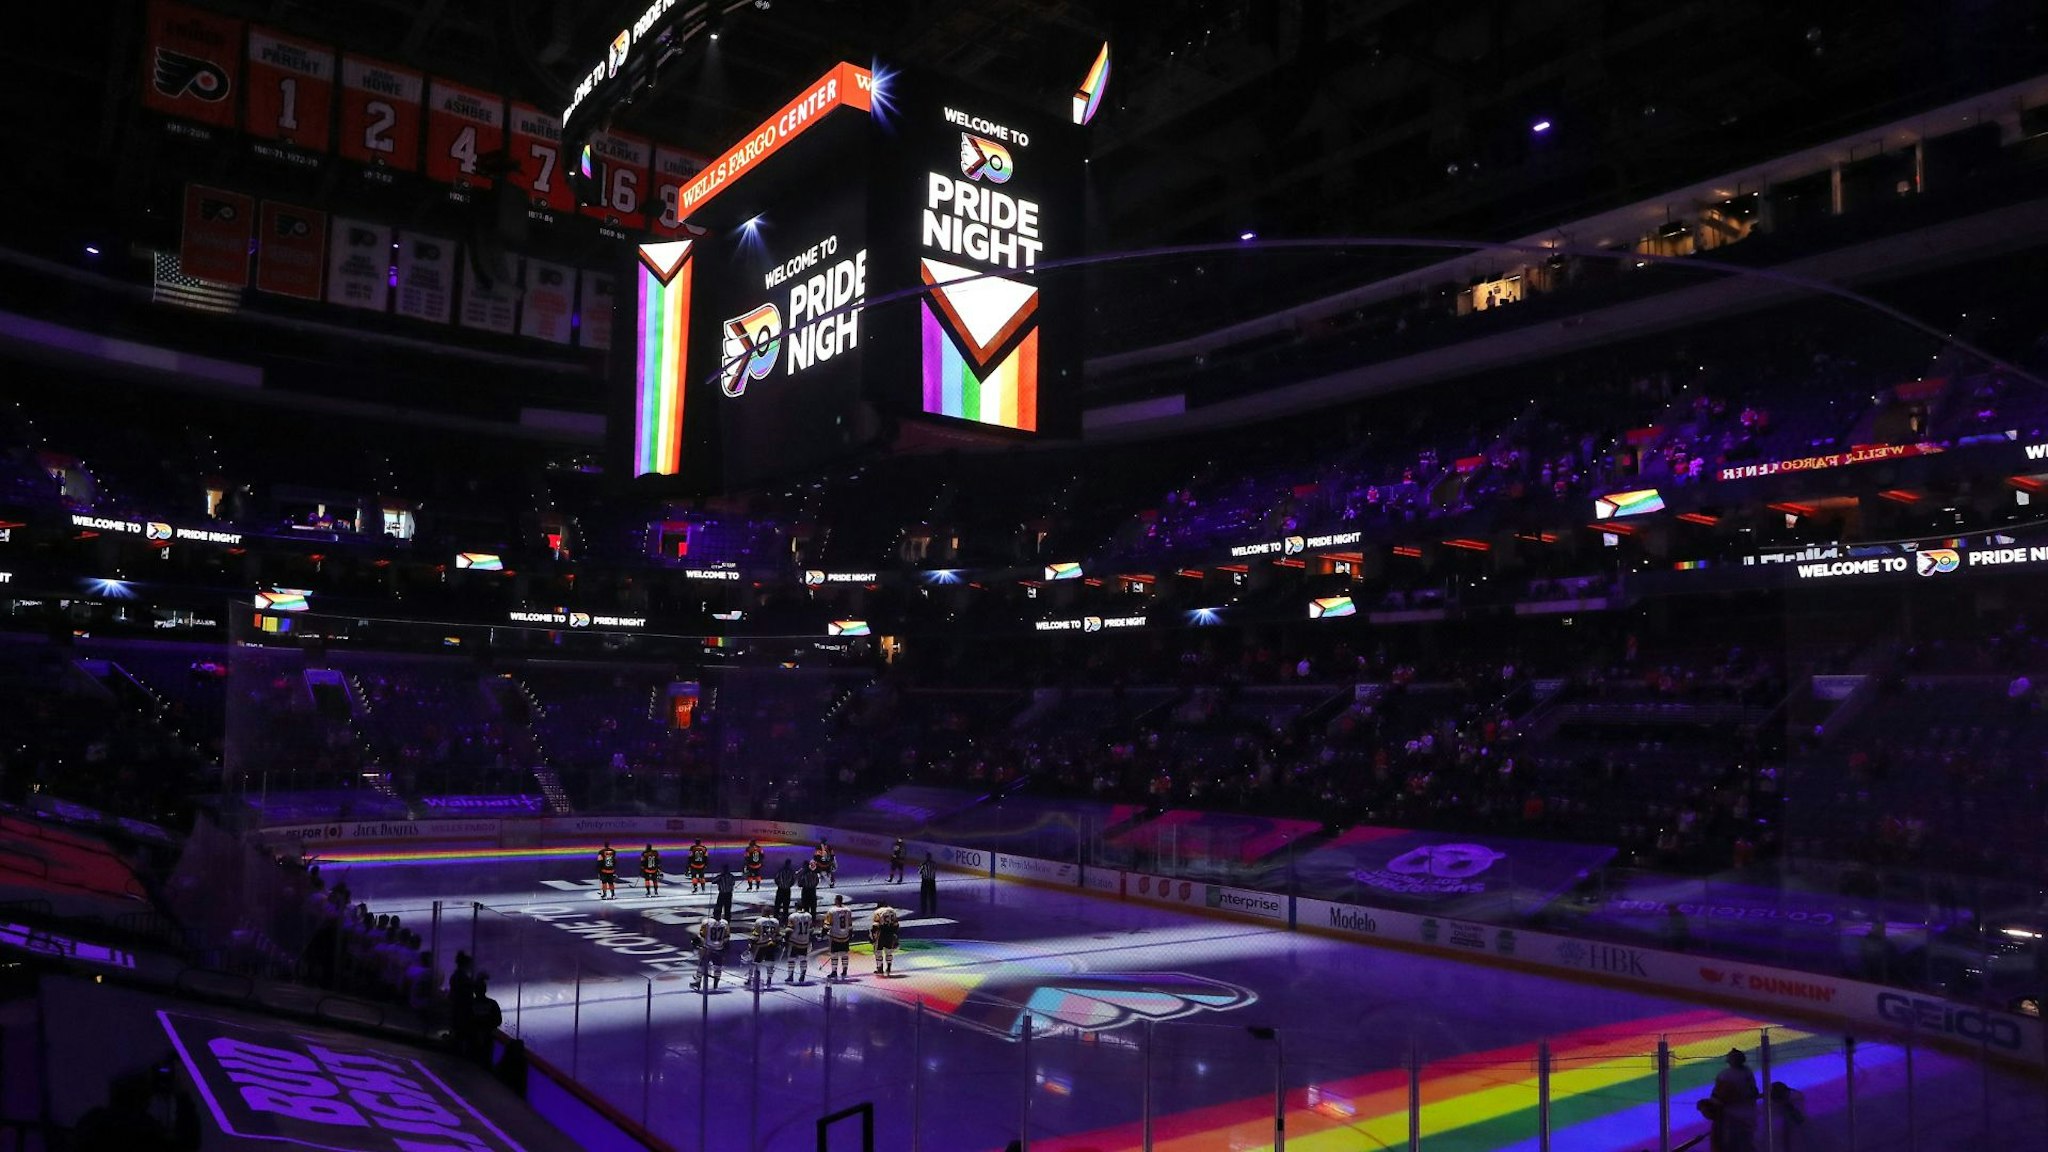 PHILADELPHIA, PA - MAY 03: Tonight's game is the Philadelphia Flyers Pride Night against the Pittsburgh Penguins at the Wells Fargo Center on May 3, 2021 in Philadelphia, Pennsylvania.